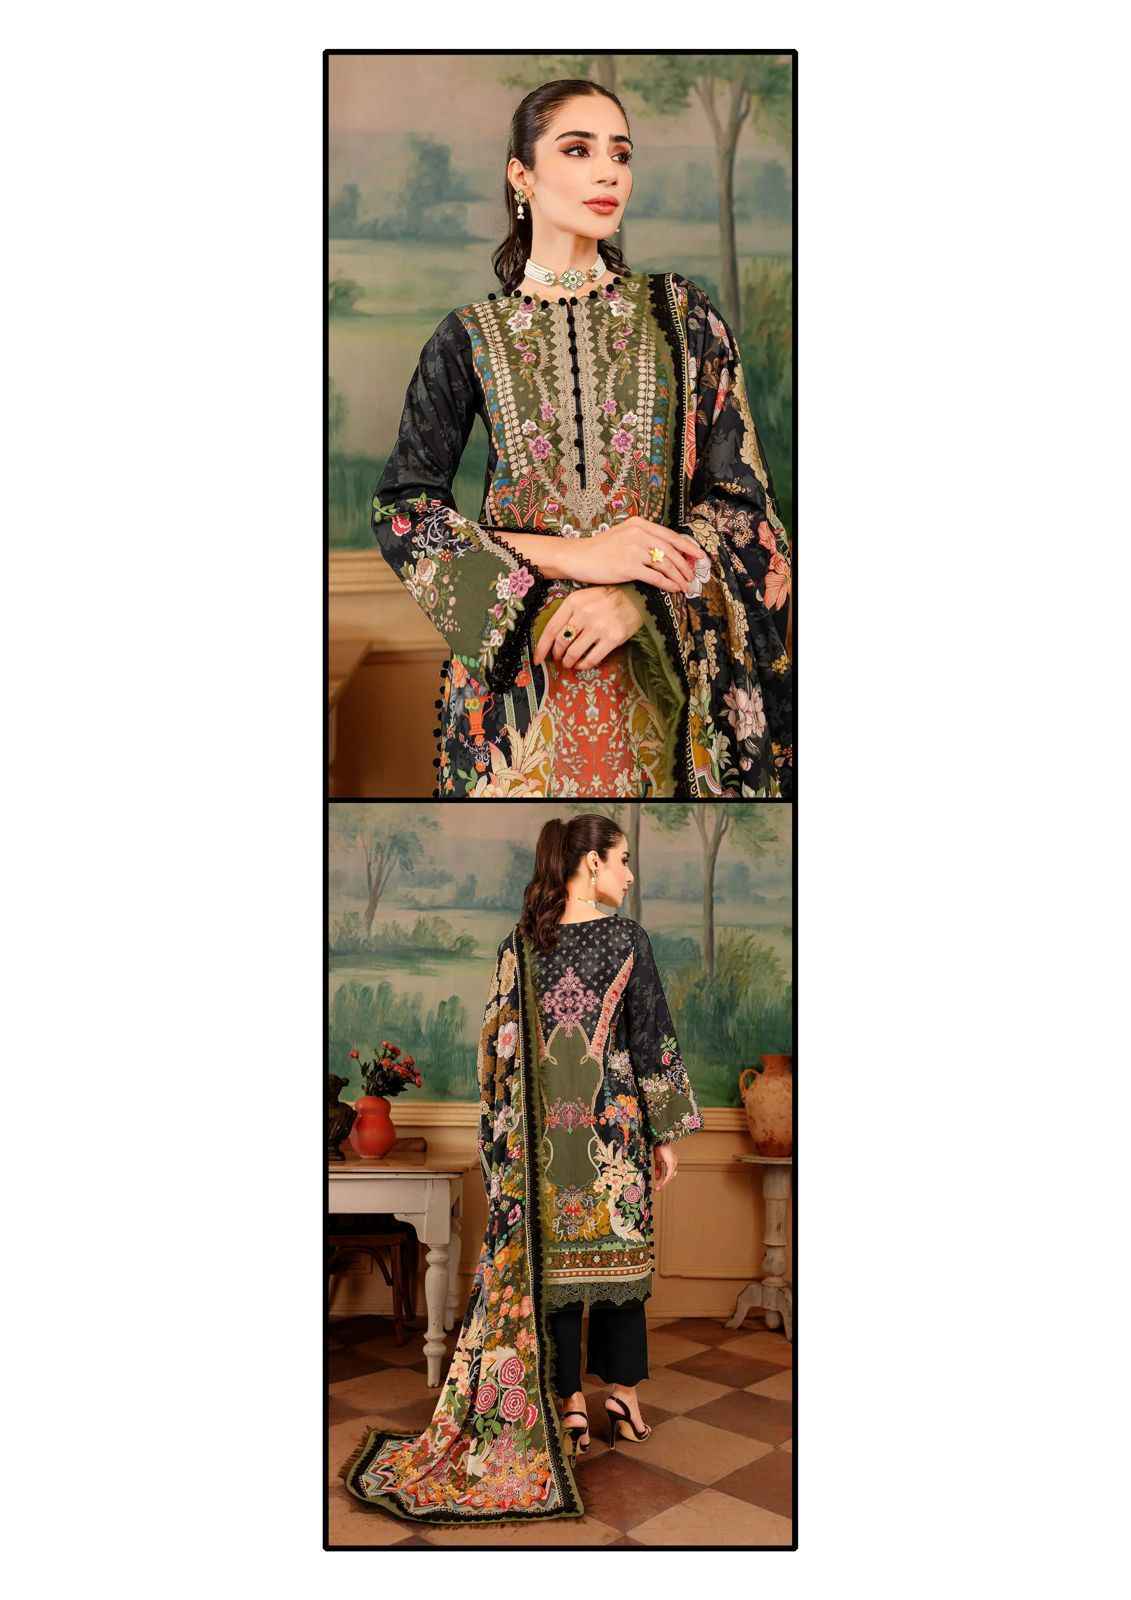 Gull Ahmed Lawn Collection Riwayat Vol-5 Dress Material (6 Pc Catalouge)